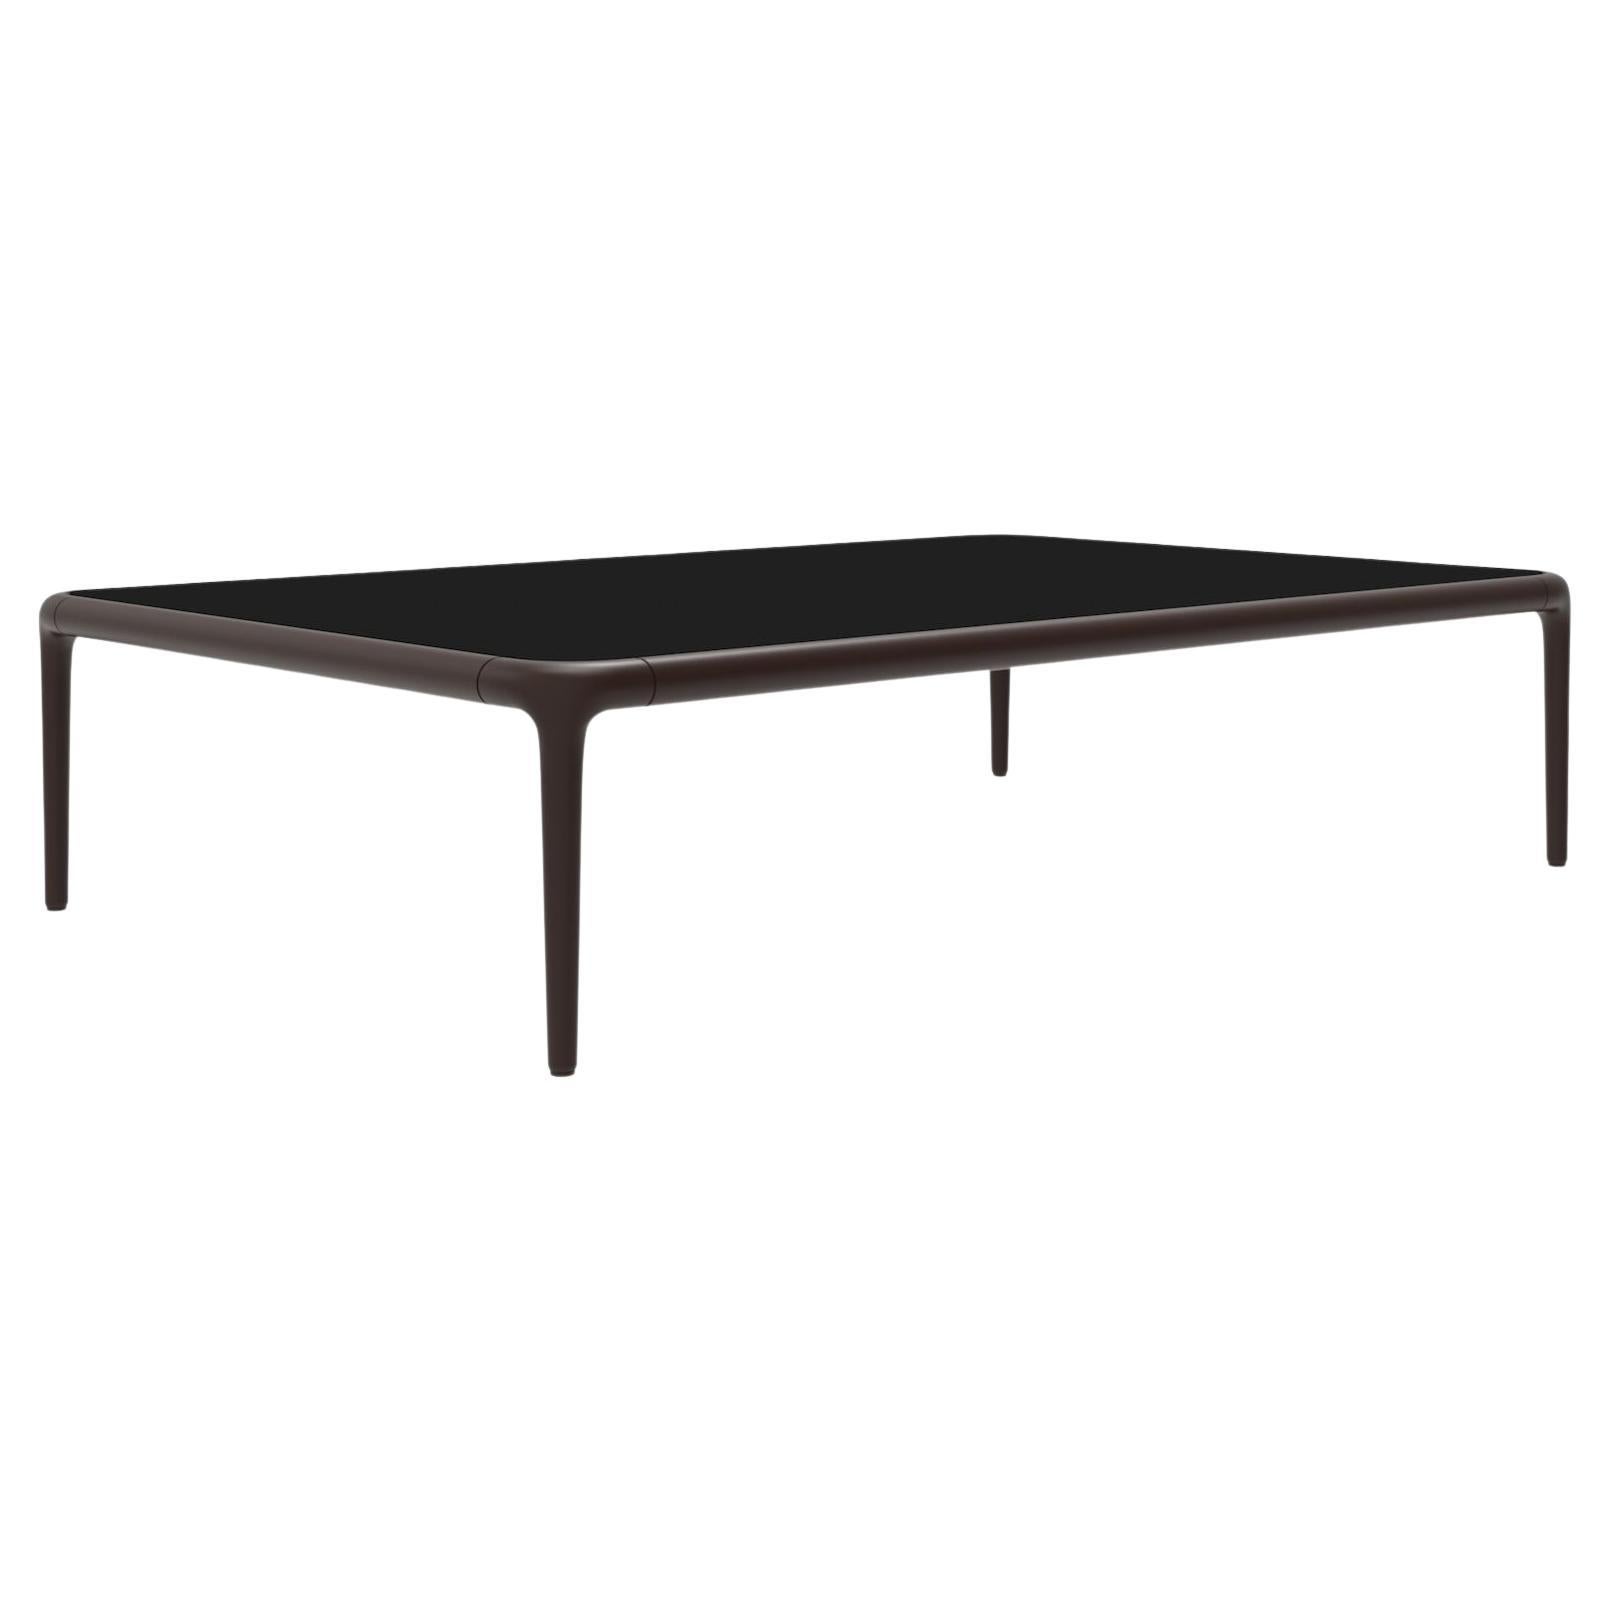 Xaloc Chocolate Coffee Table 120 with Glass Top by Mowee For Sale